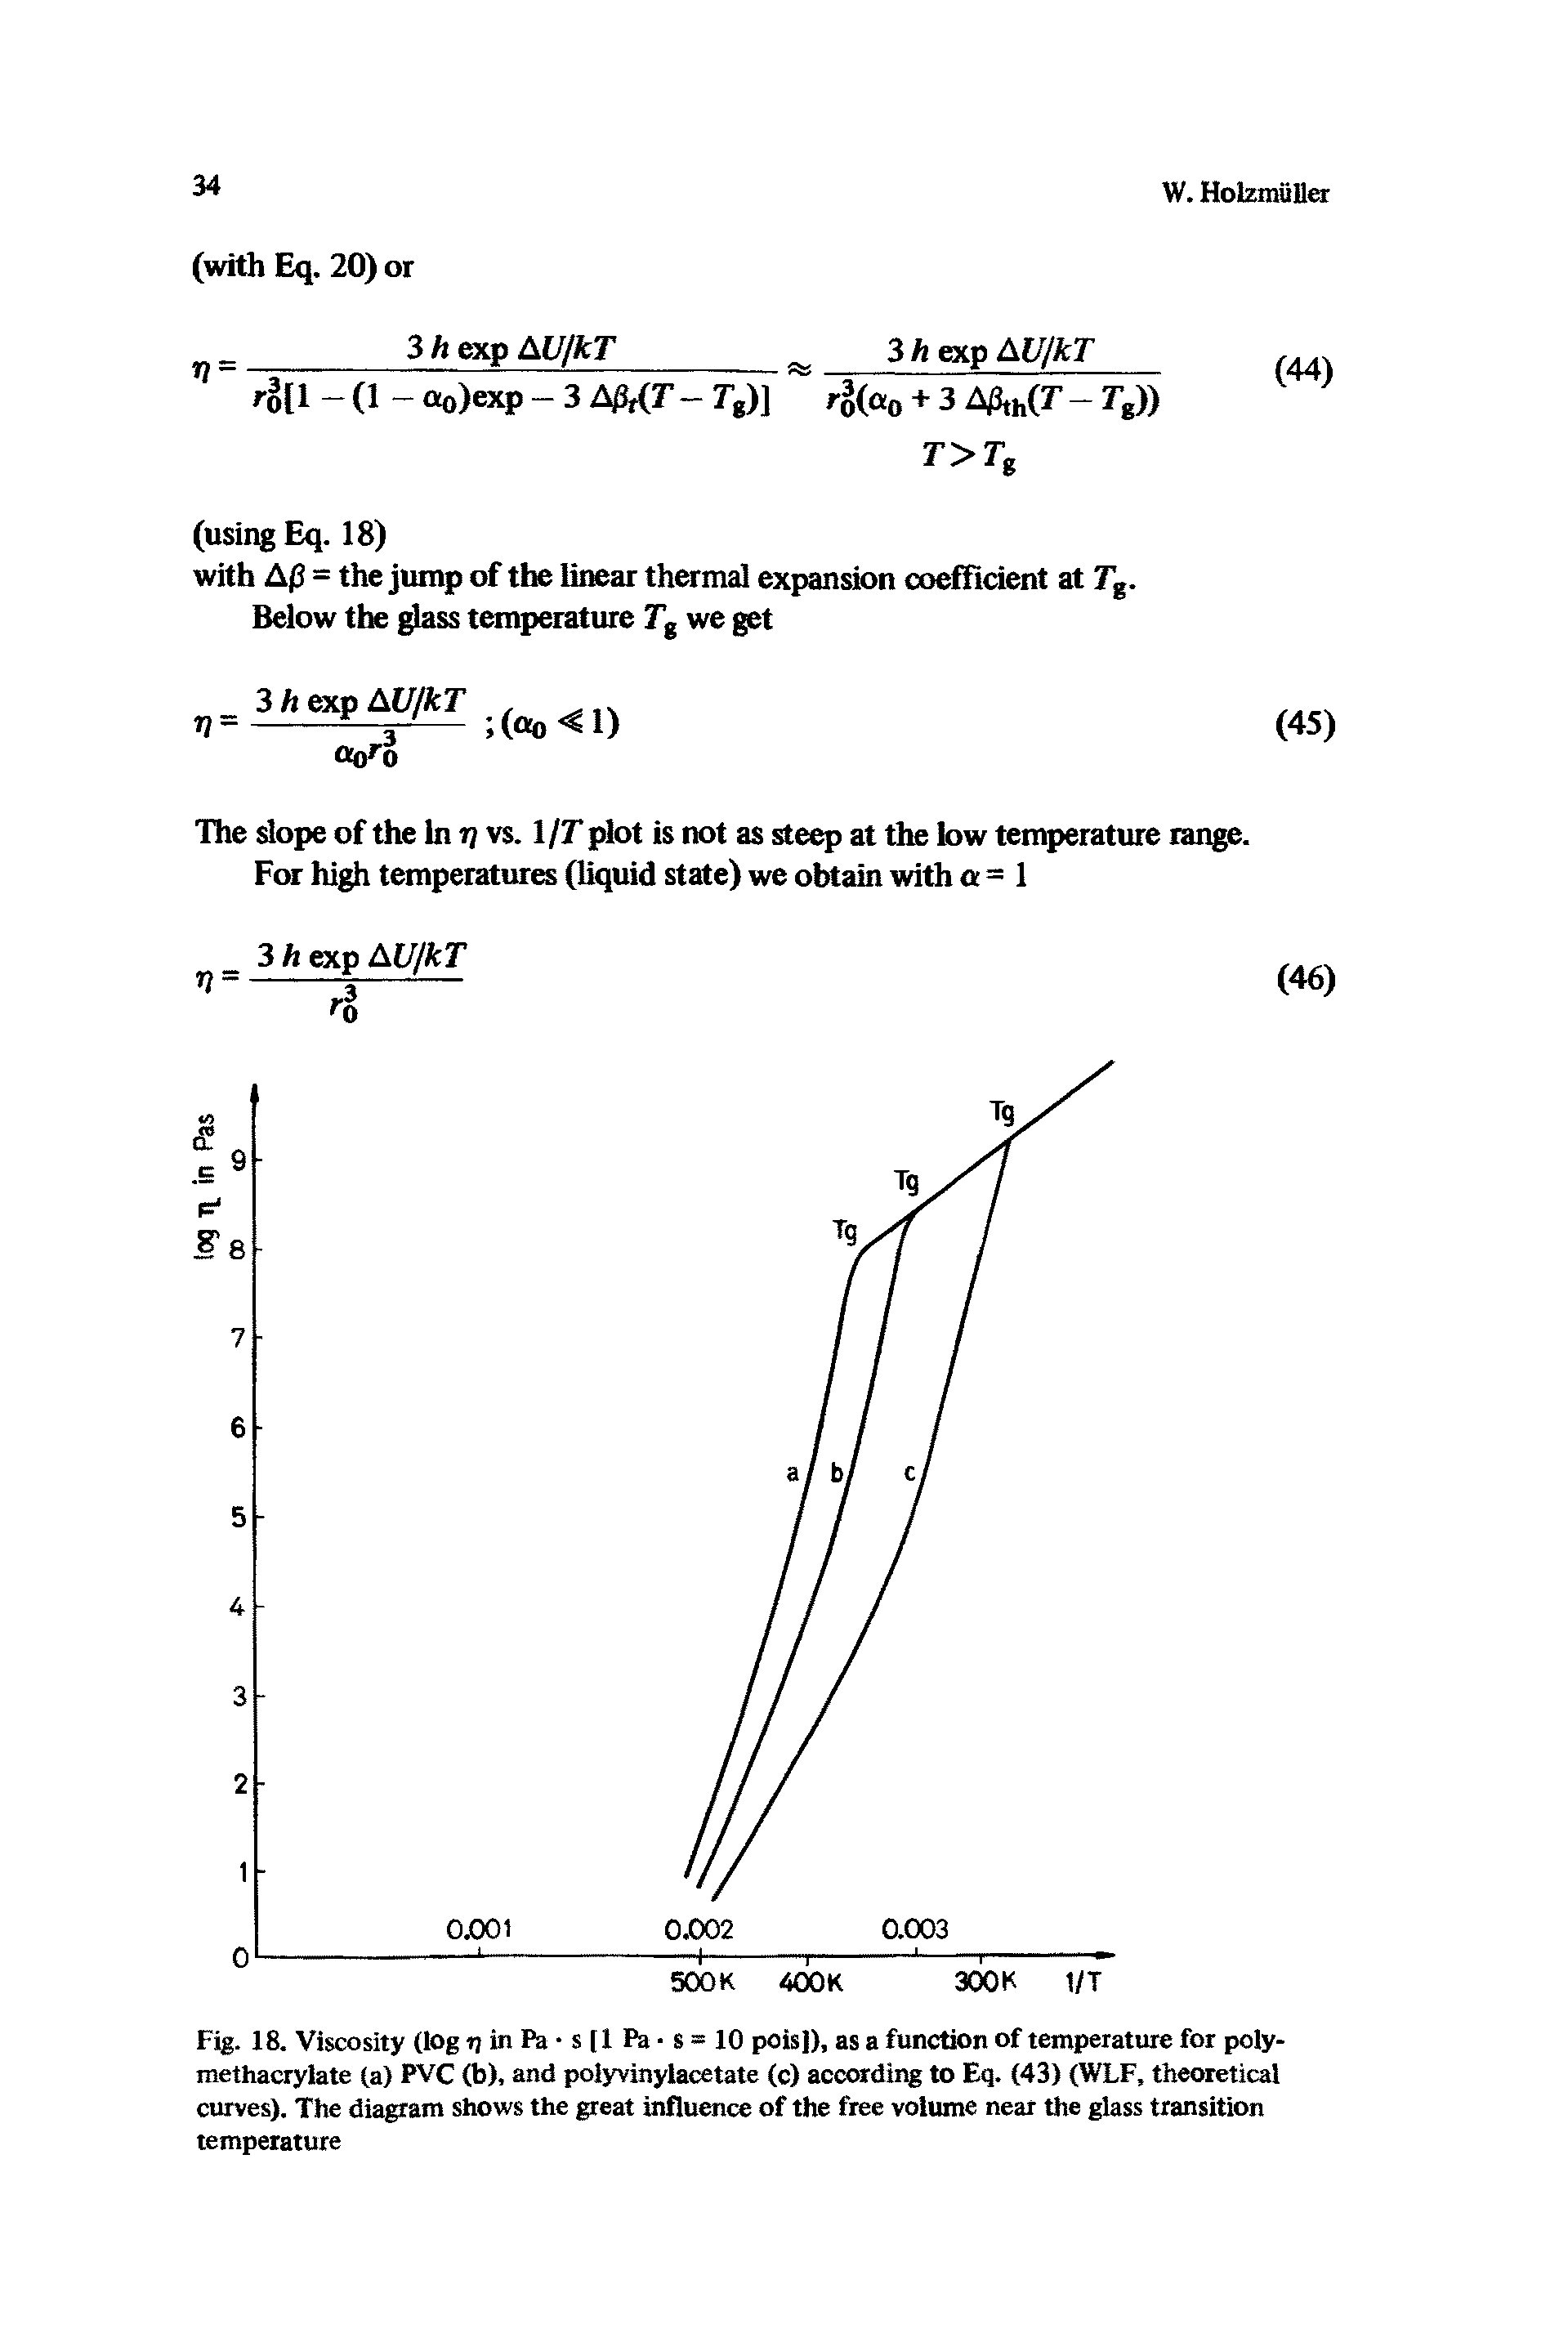 Fig. 18. Viscosity (log rjinPa-s[lPa-s=10 pois]), as a function of temperature for polymethacrylate (a) PVC (b), and polyvinylacetate (c) according to Eq. (43) (WLF, theoretical curves). The diagram shows the great influence of the free volume near the glass transition temperature...